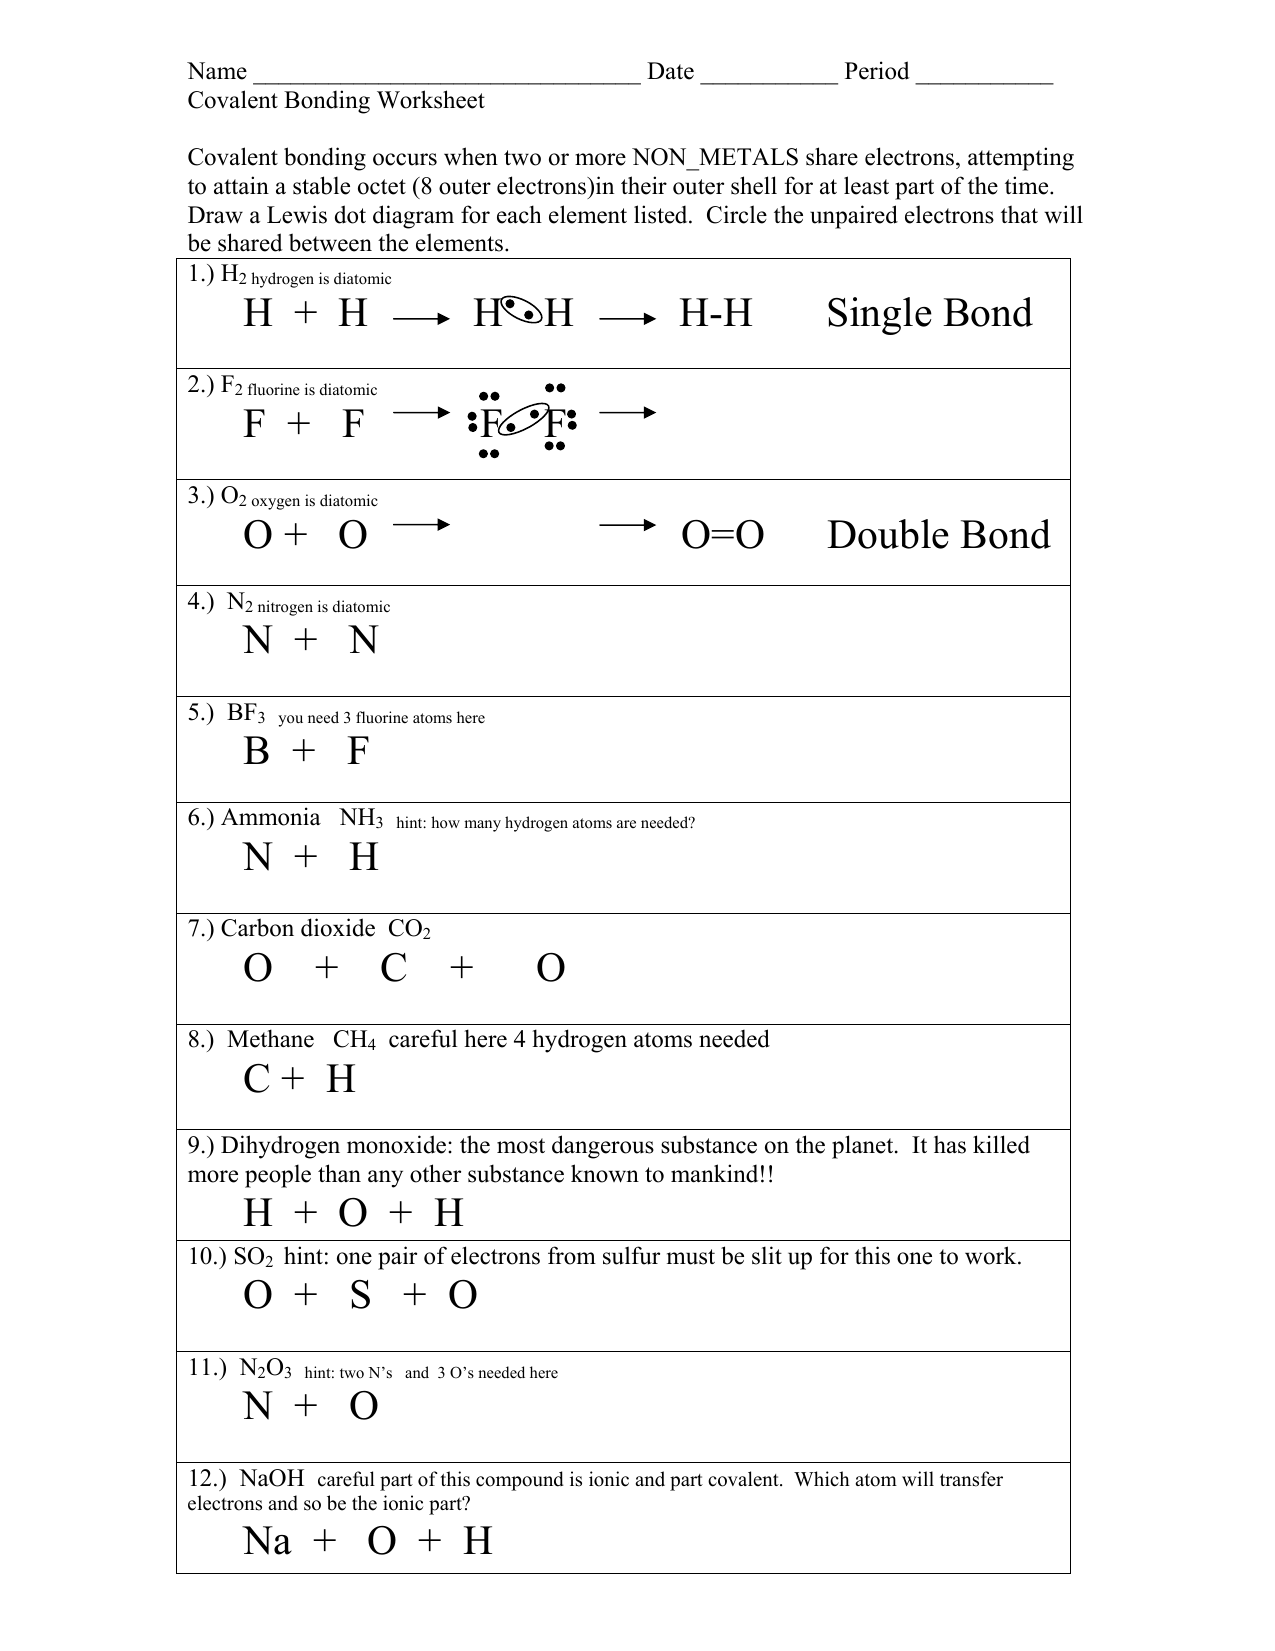 types-of-chemical-bonds-worksheet-answer-key-tokoonlineindonesia-id